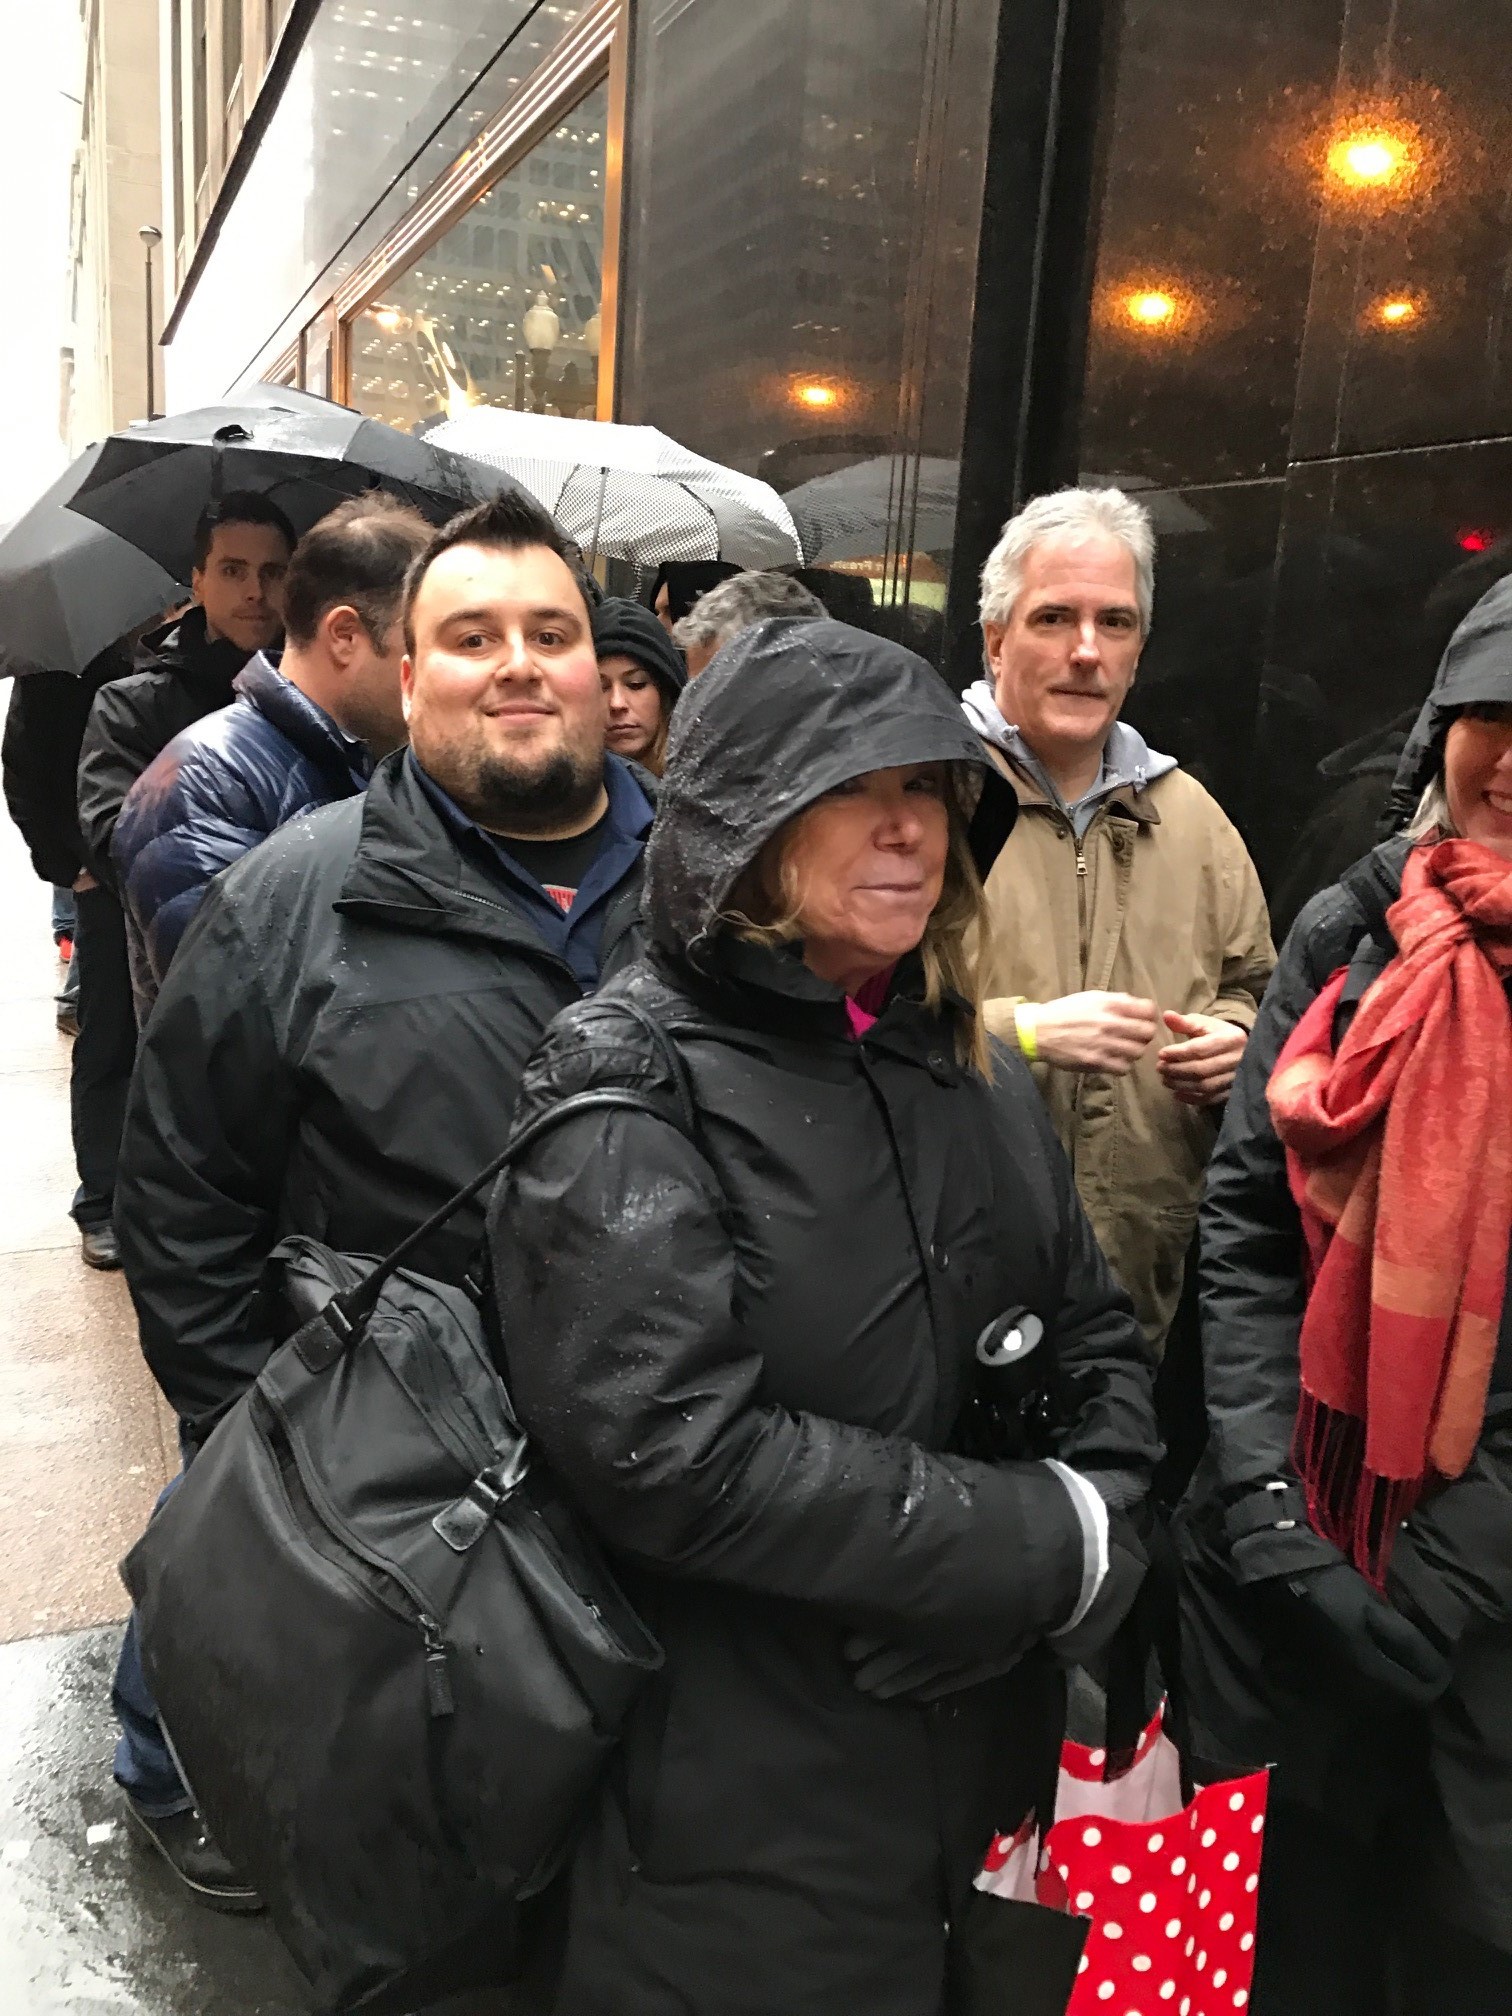 Fans line up outside, streching three blocks, for Bruce Springsteen's book signing (Credit: WBBM/Lisa Fielding)